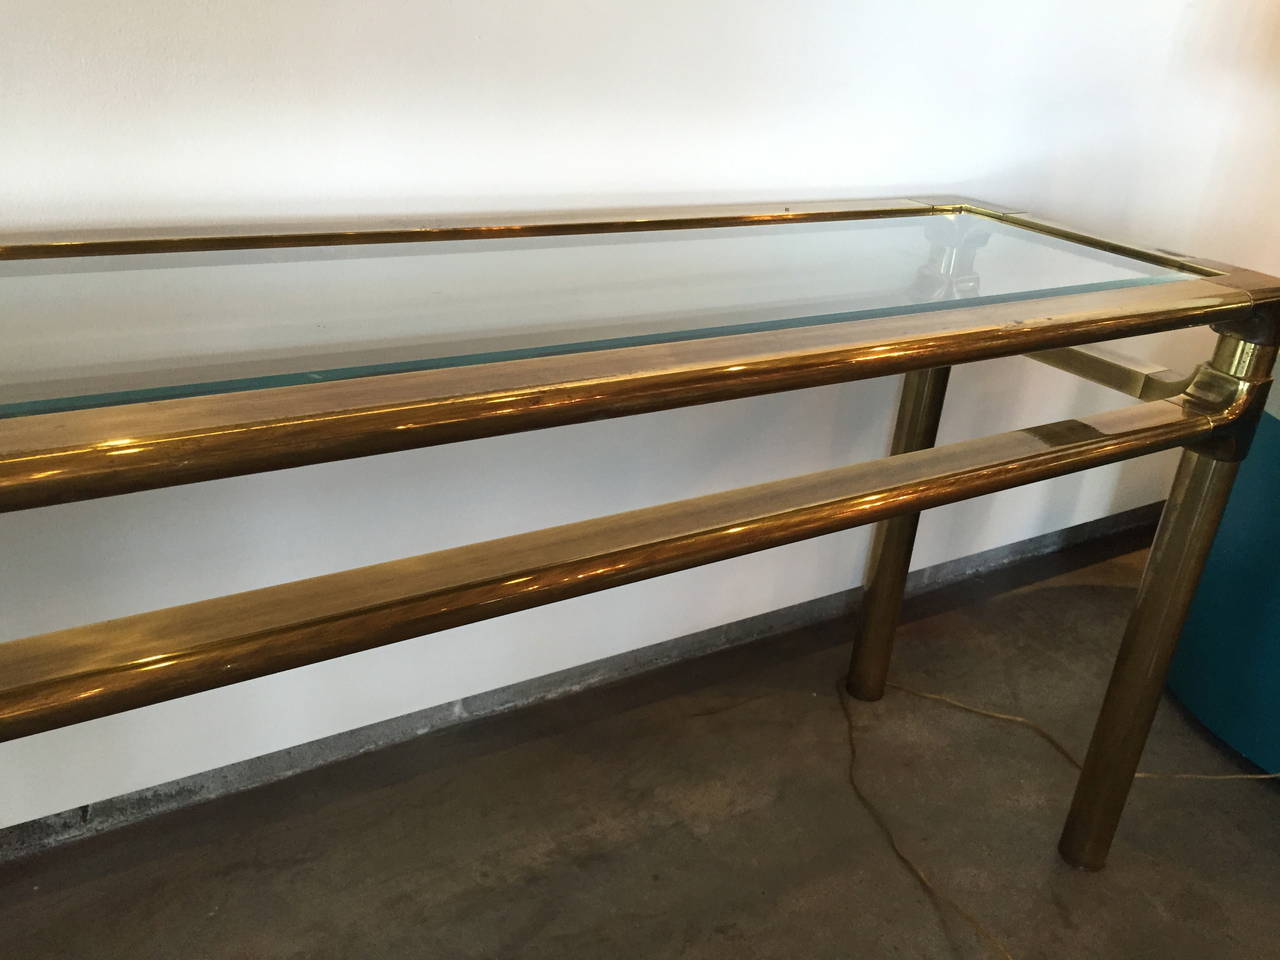 Offered is an extremely rare brass and glass console by Mastercraft. Perfect for displaying vintage cocktail sets, art glass, books…anything! Even if you can find one of these gems in pristine condition on the market, you will never see it for this